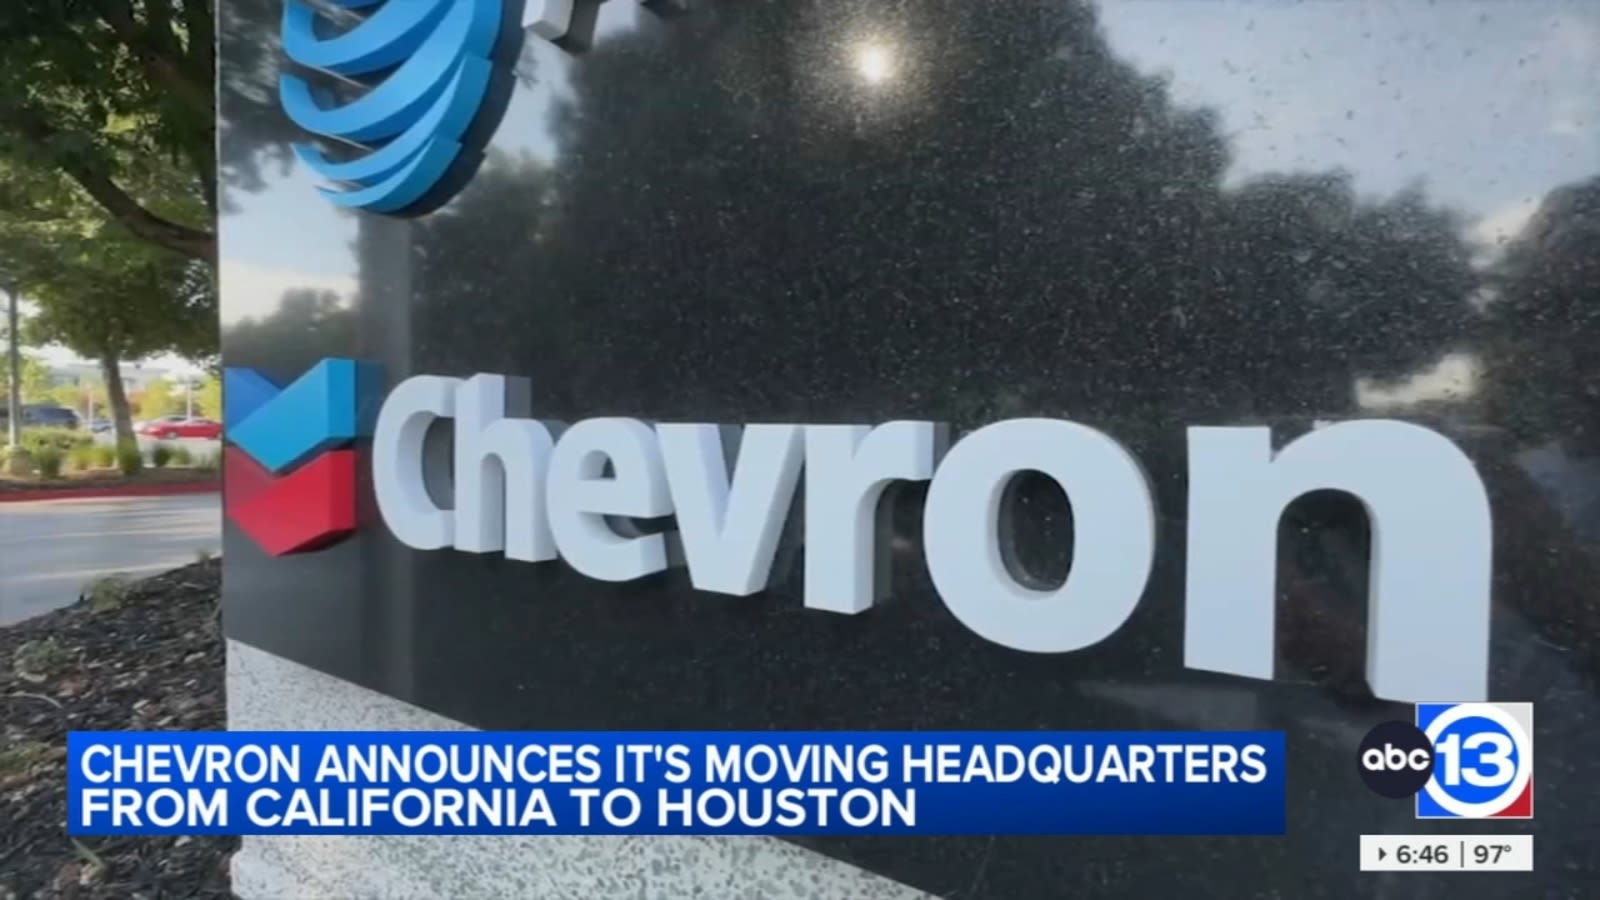 Houston will soon be home to Chevron's headquarters, so how will this impact workers?